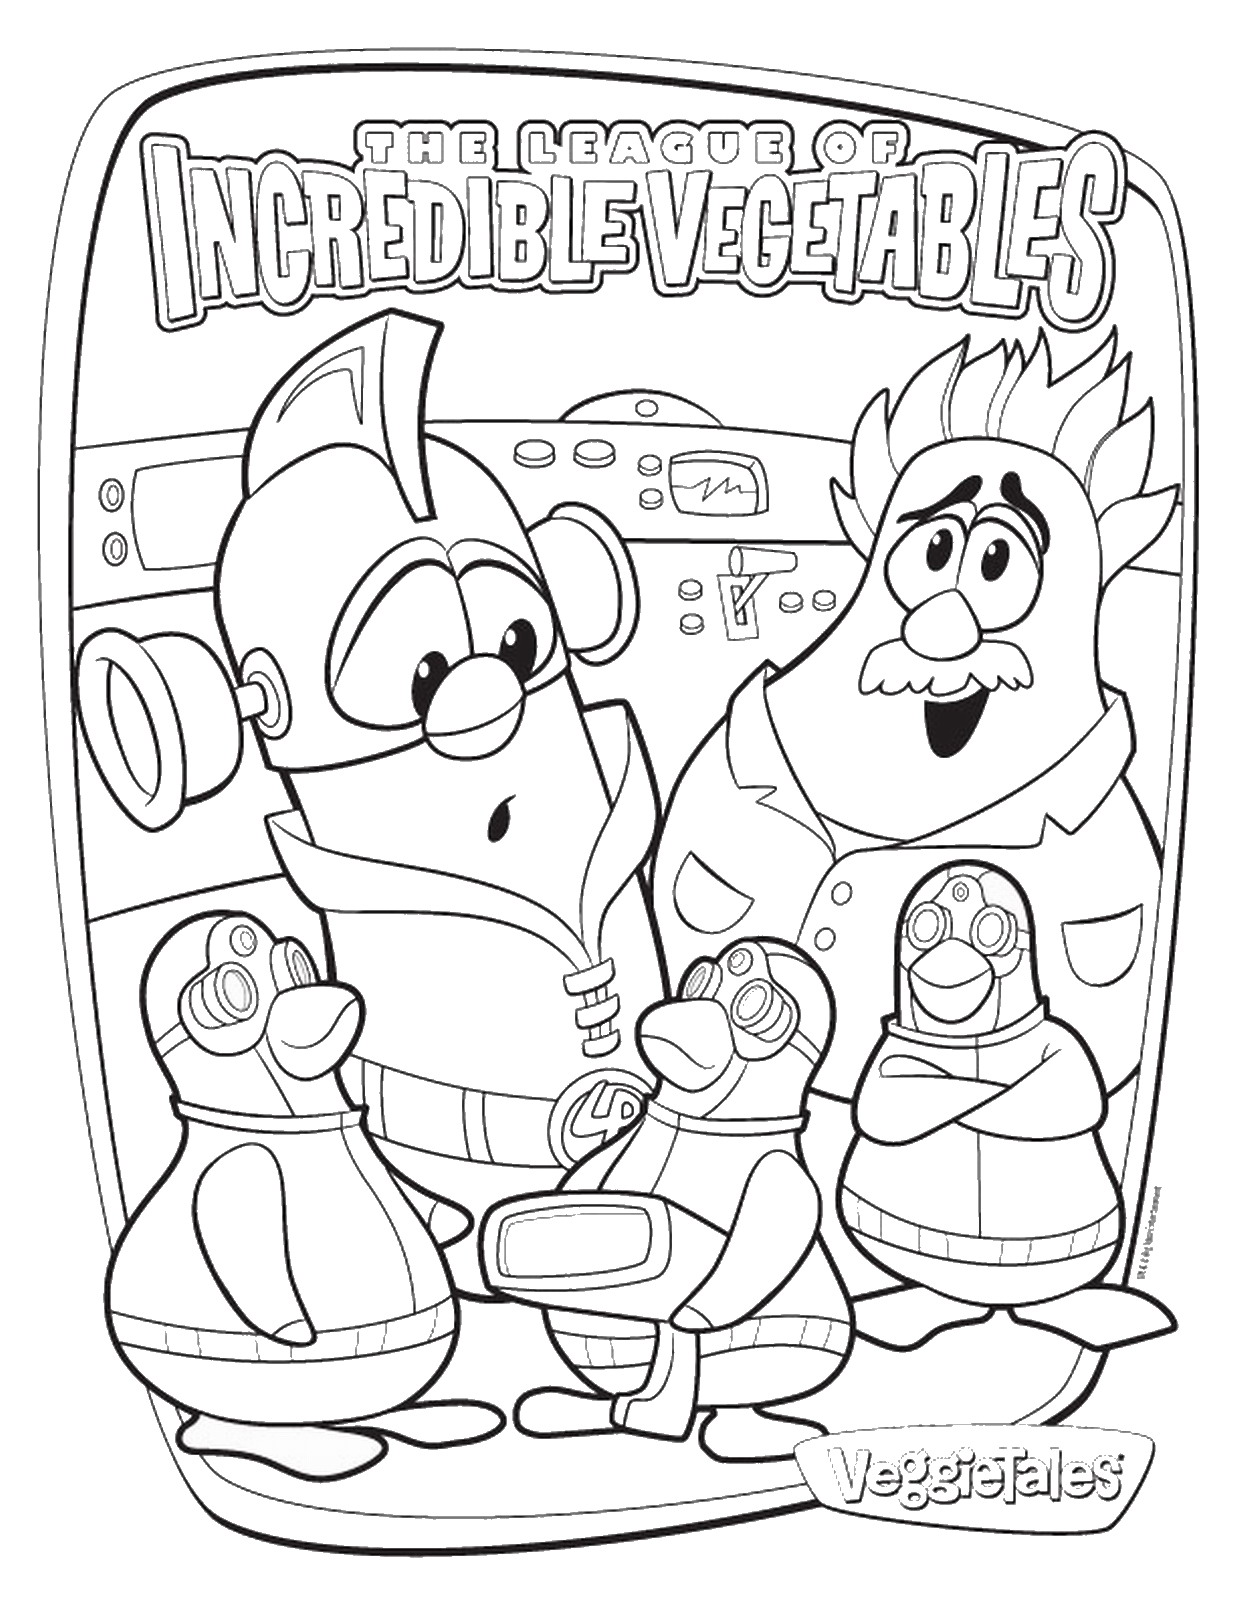 veggie tales coloring book pages